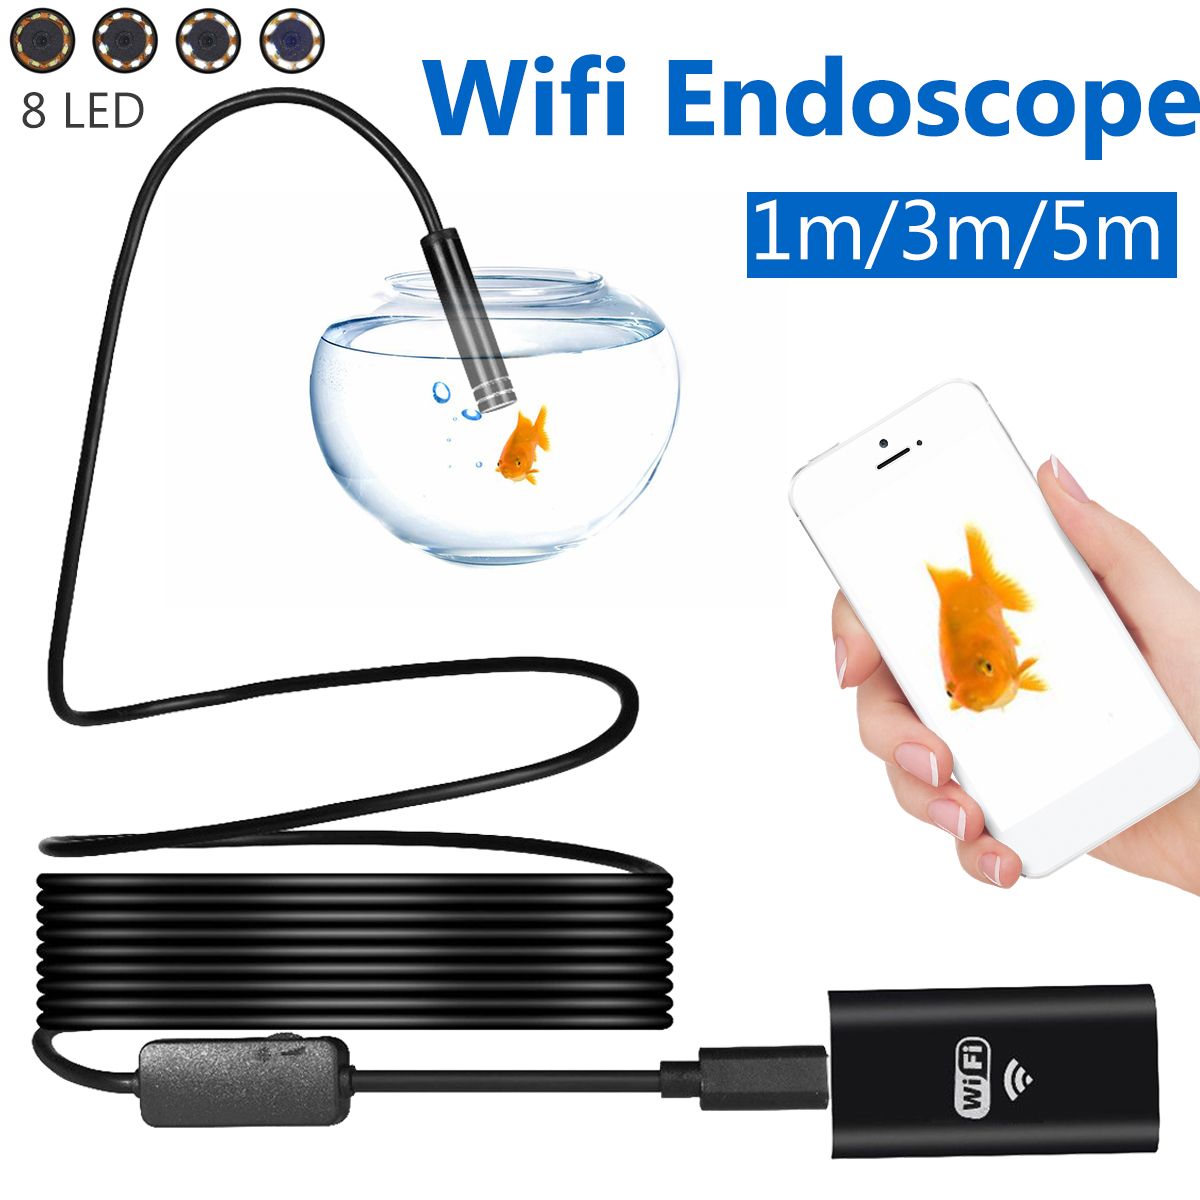 8mm-720P-Wifi-Borescope-Camera-Snake-8-LED-Light-Waterproof-For-Android-iOS-1267909